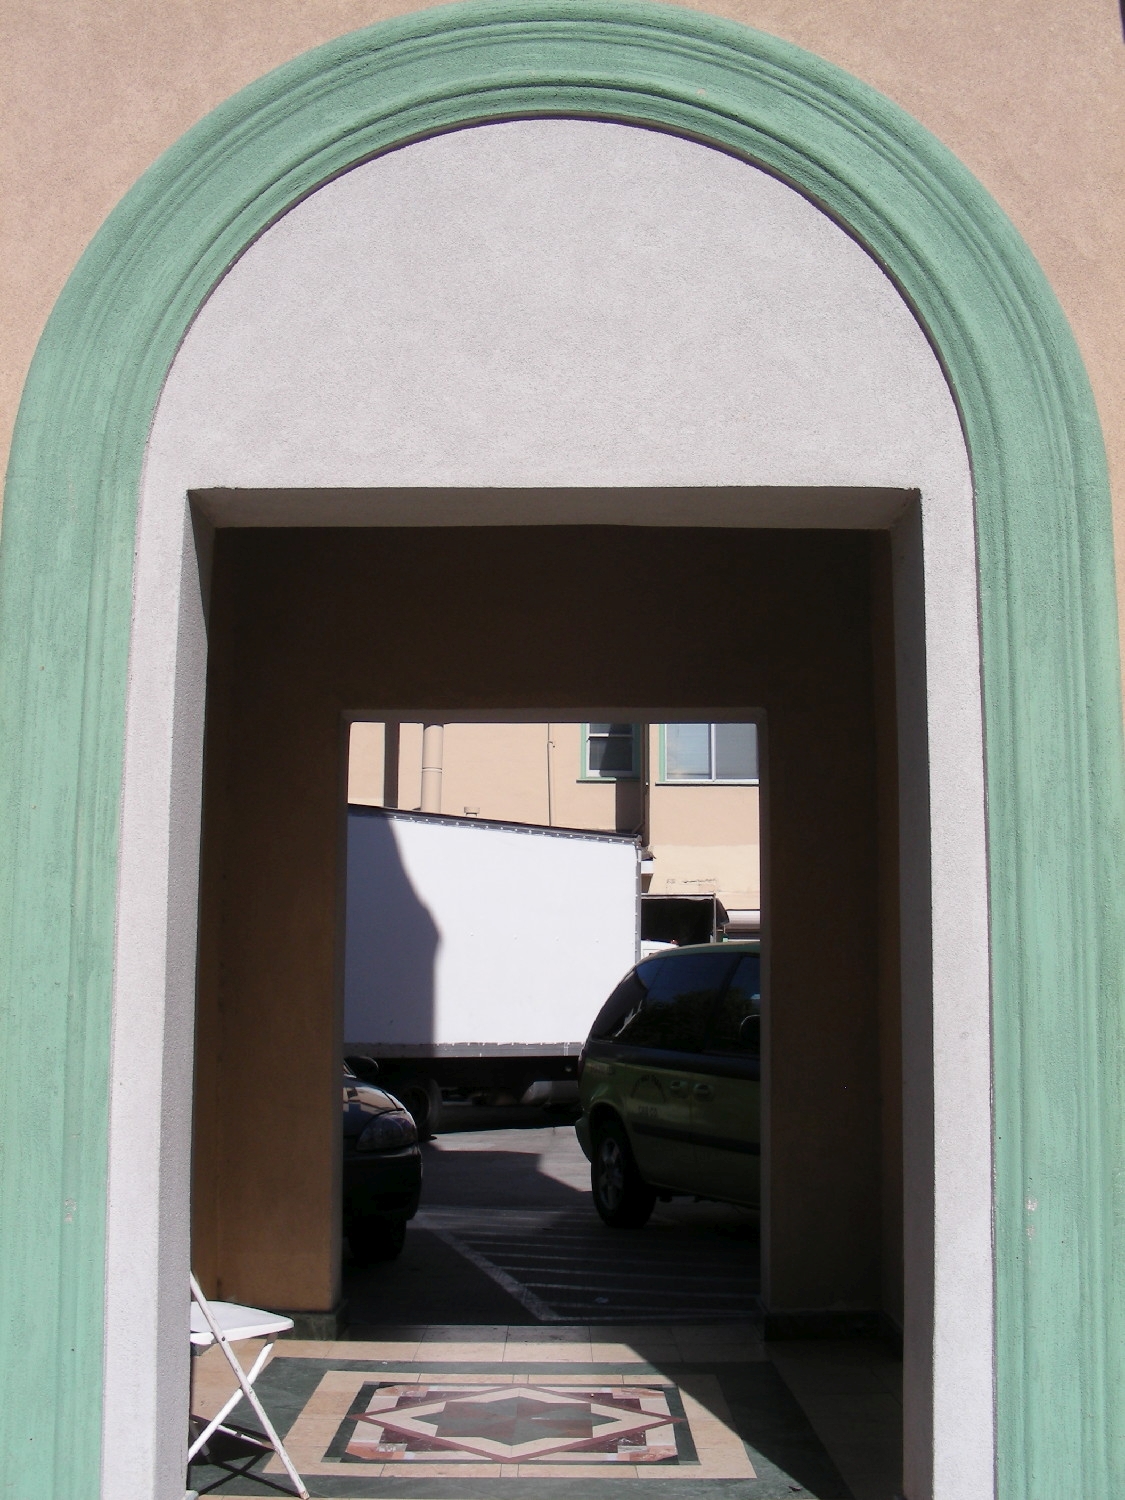 View looking west through minaret base and entryway